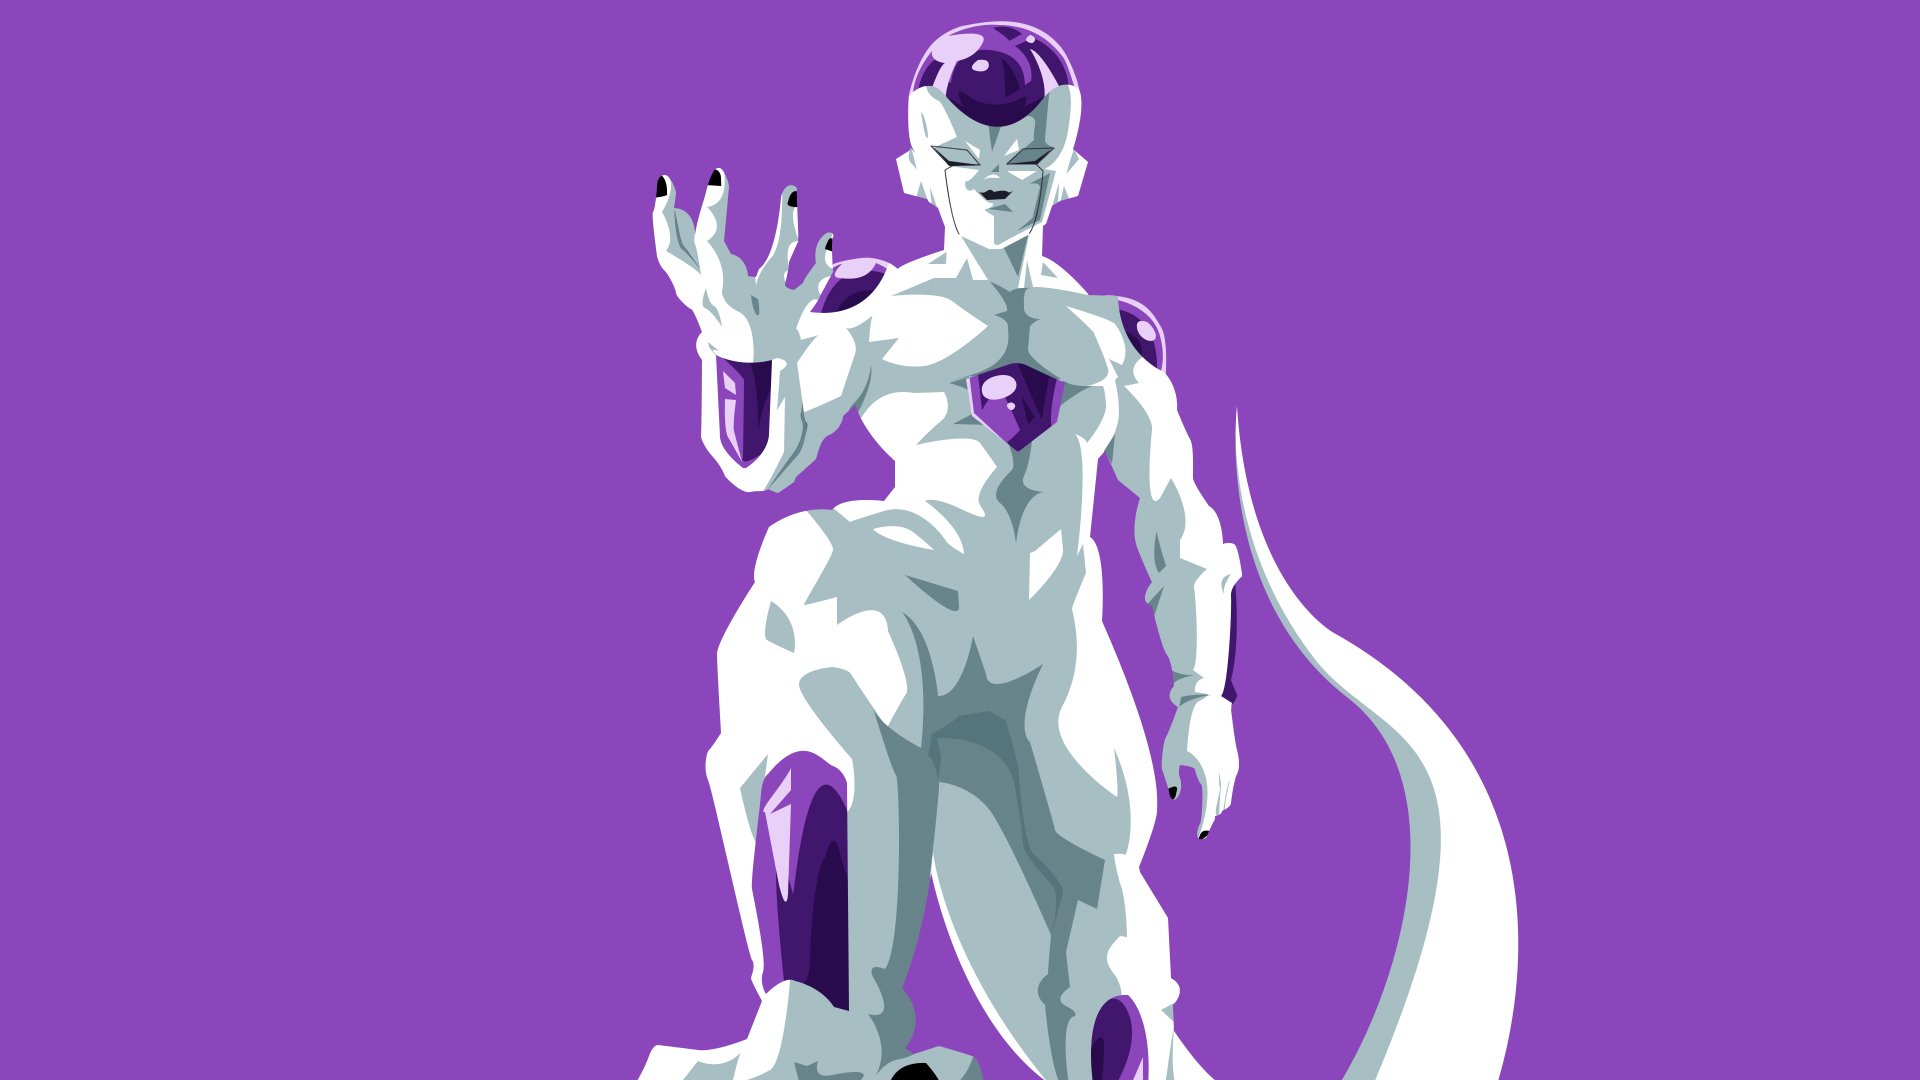 #iphone. ball z #frieza. wallpaper cave. #wallpapers. wallpapers. frieza. #...